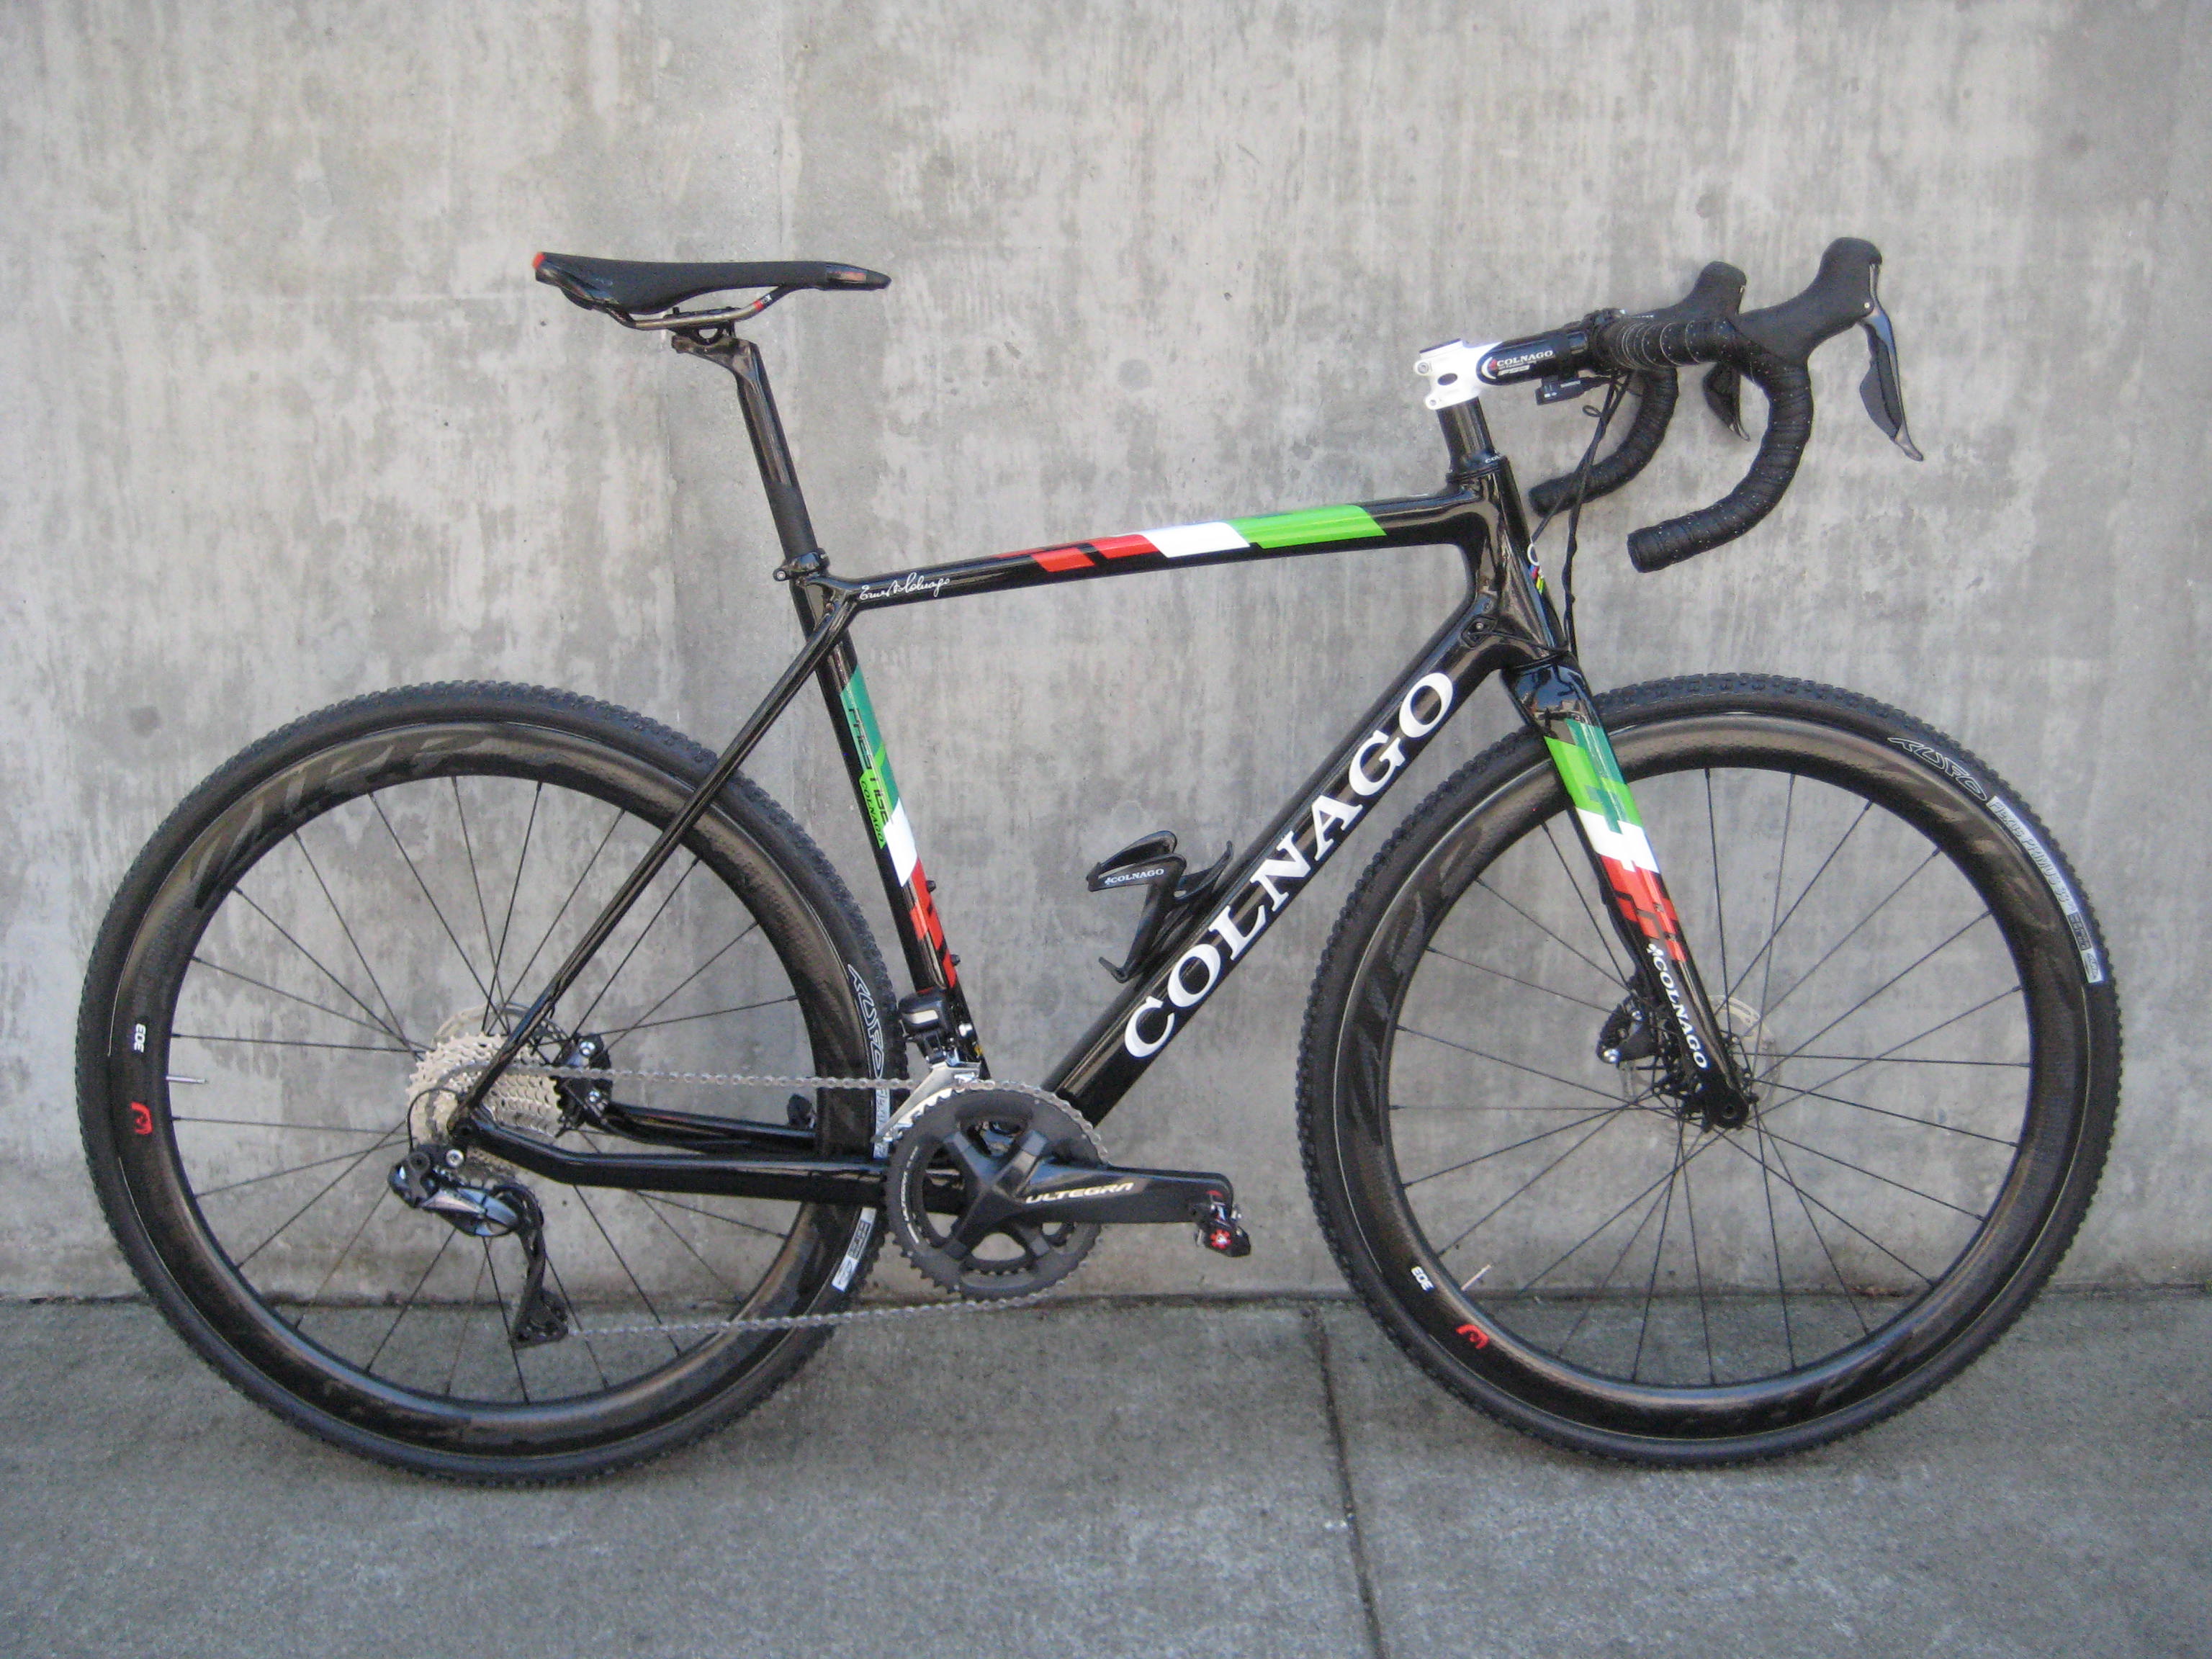 Used Colnago Bikes For Sale Online